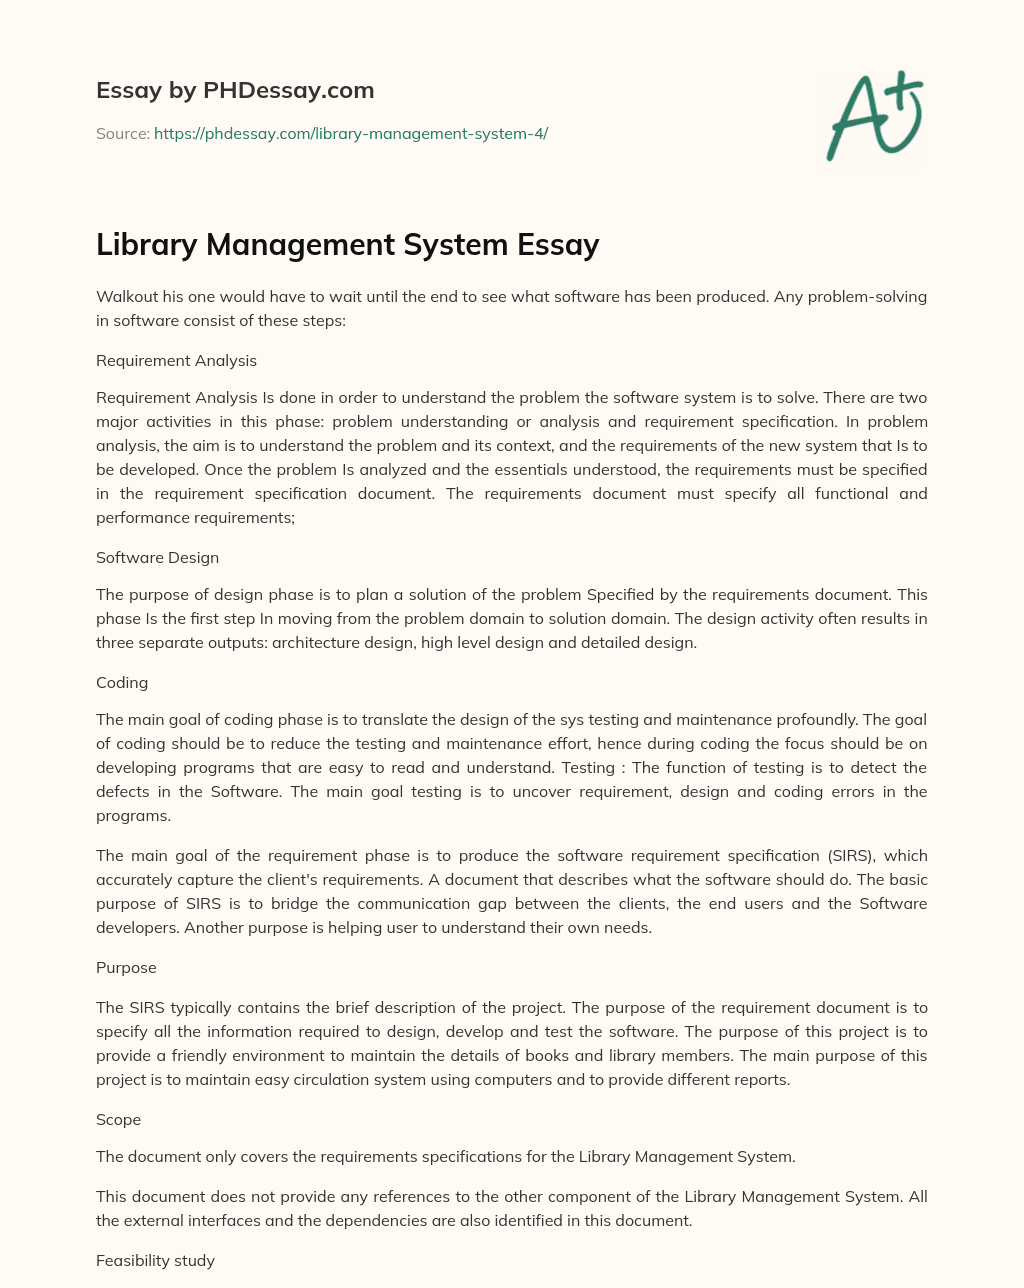 library management system essay